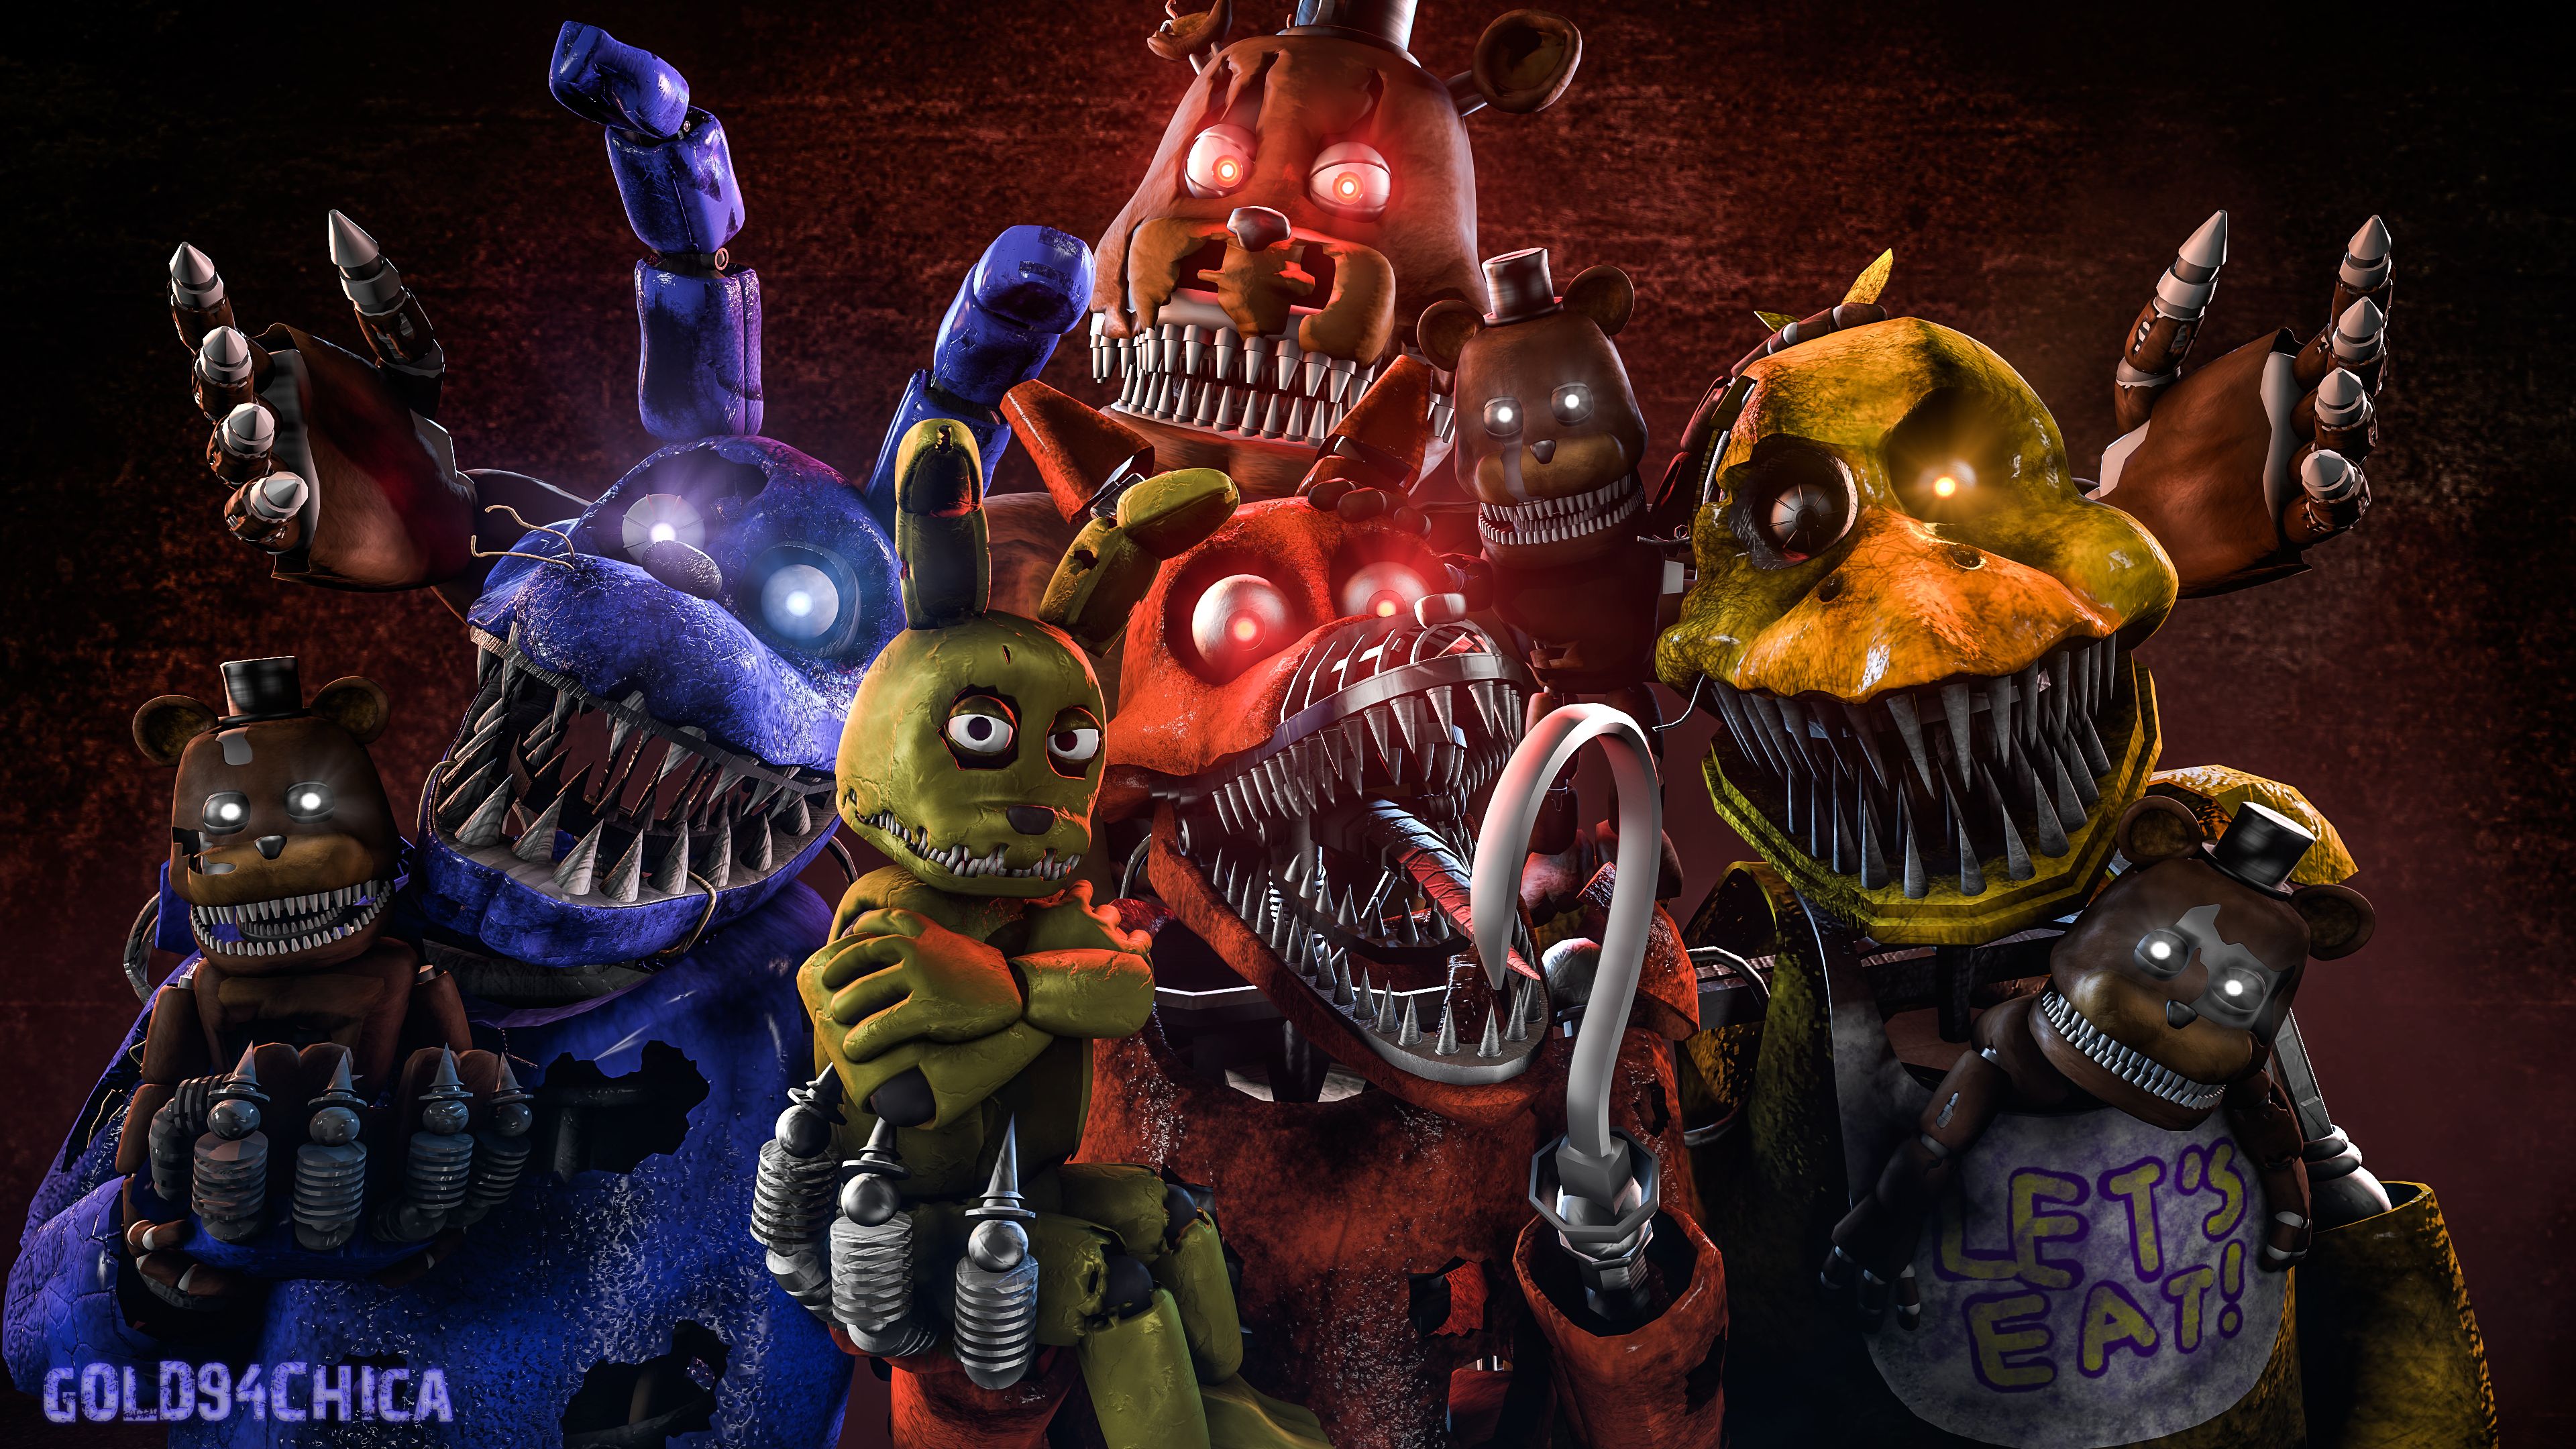 Scary FNaF Wallpaper  Five Nights at Freddys Wallpaper iPhone